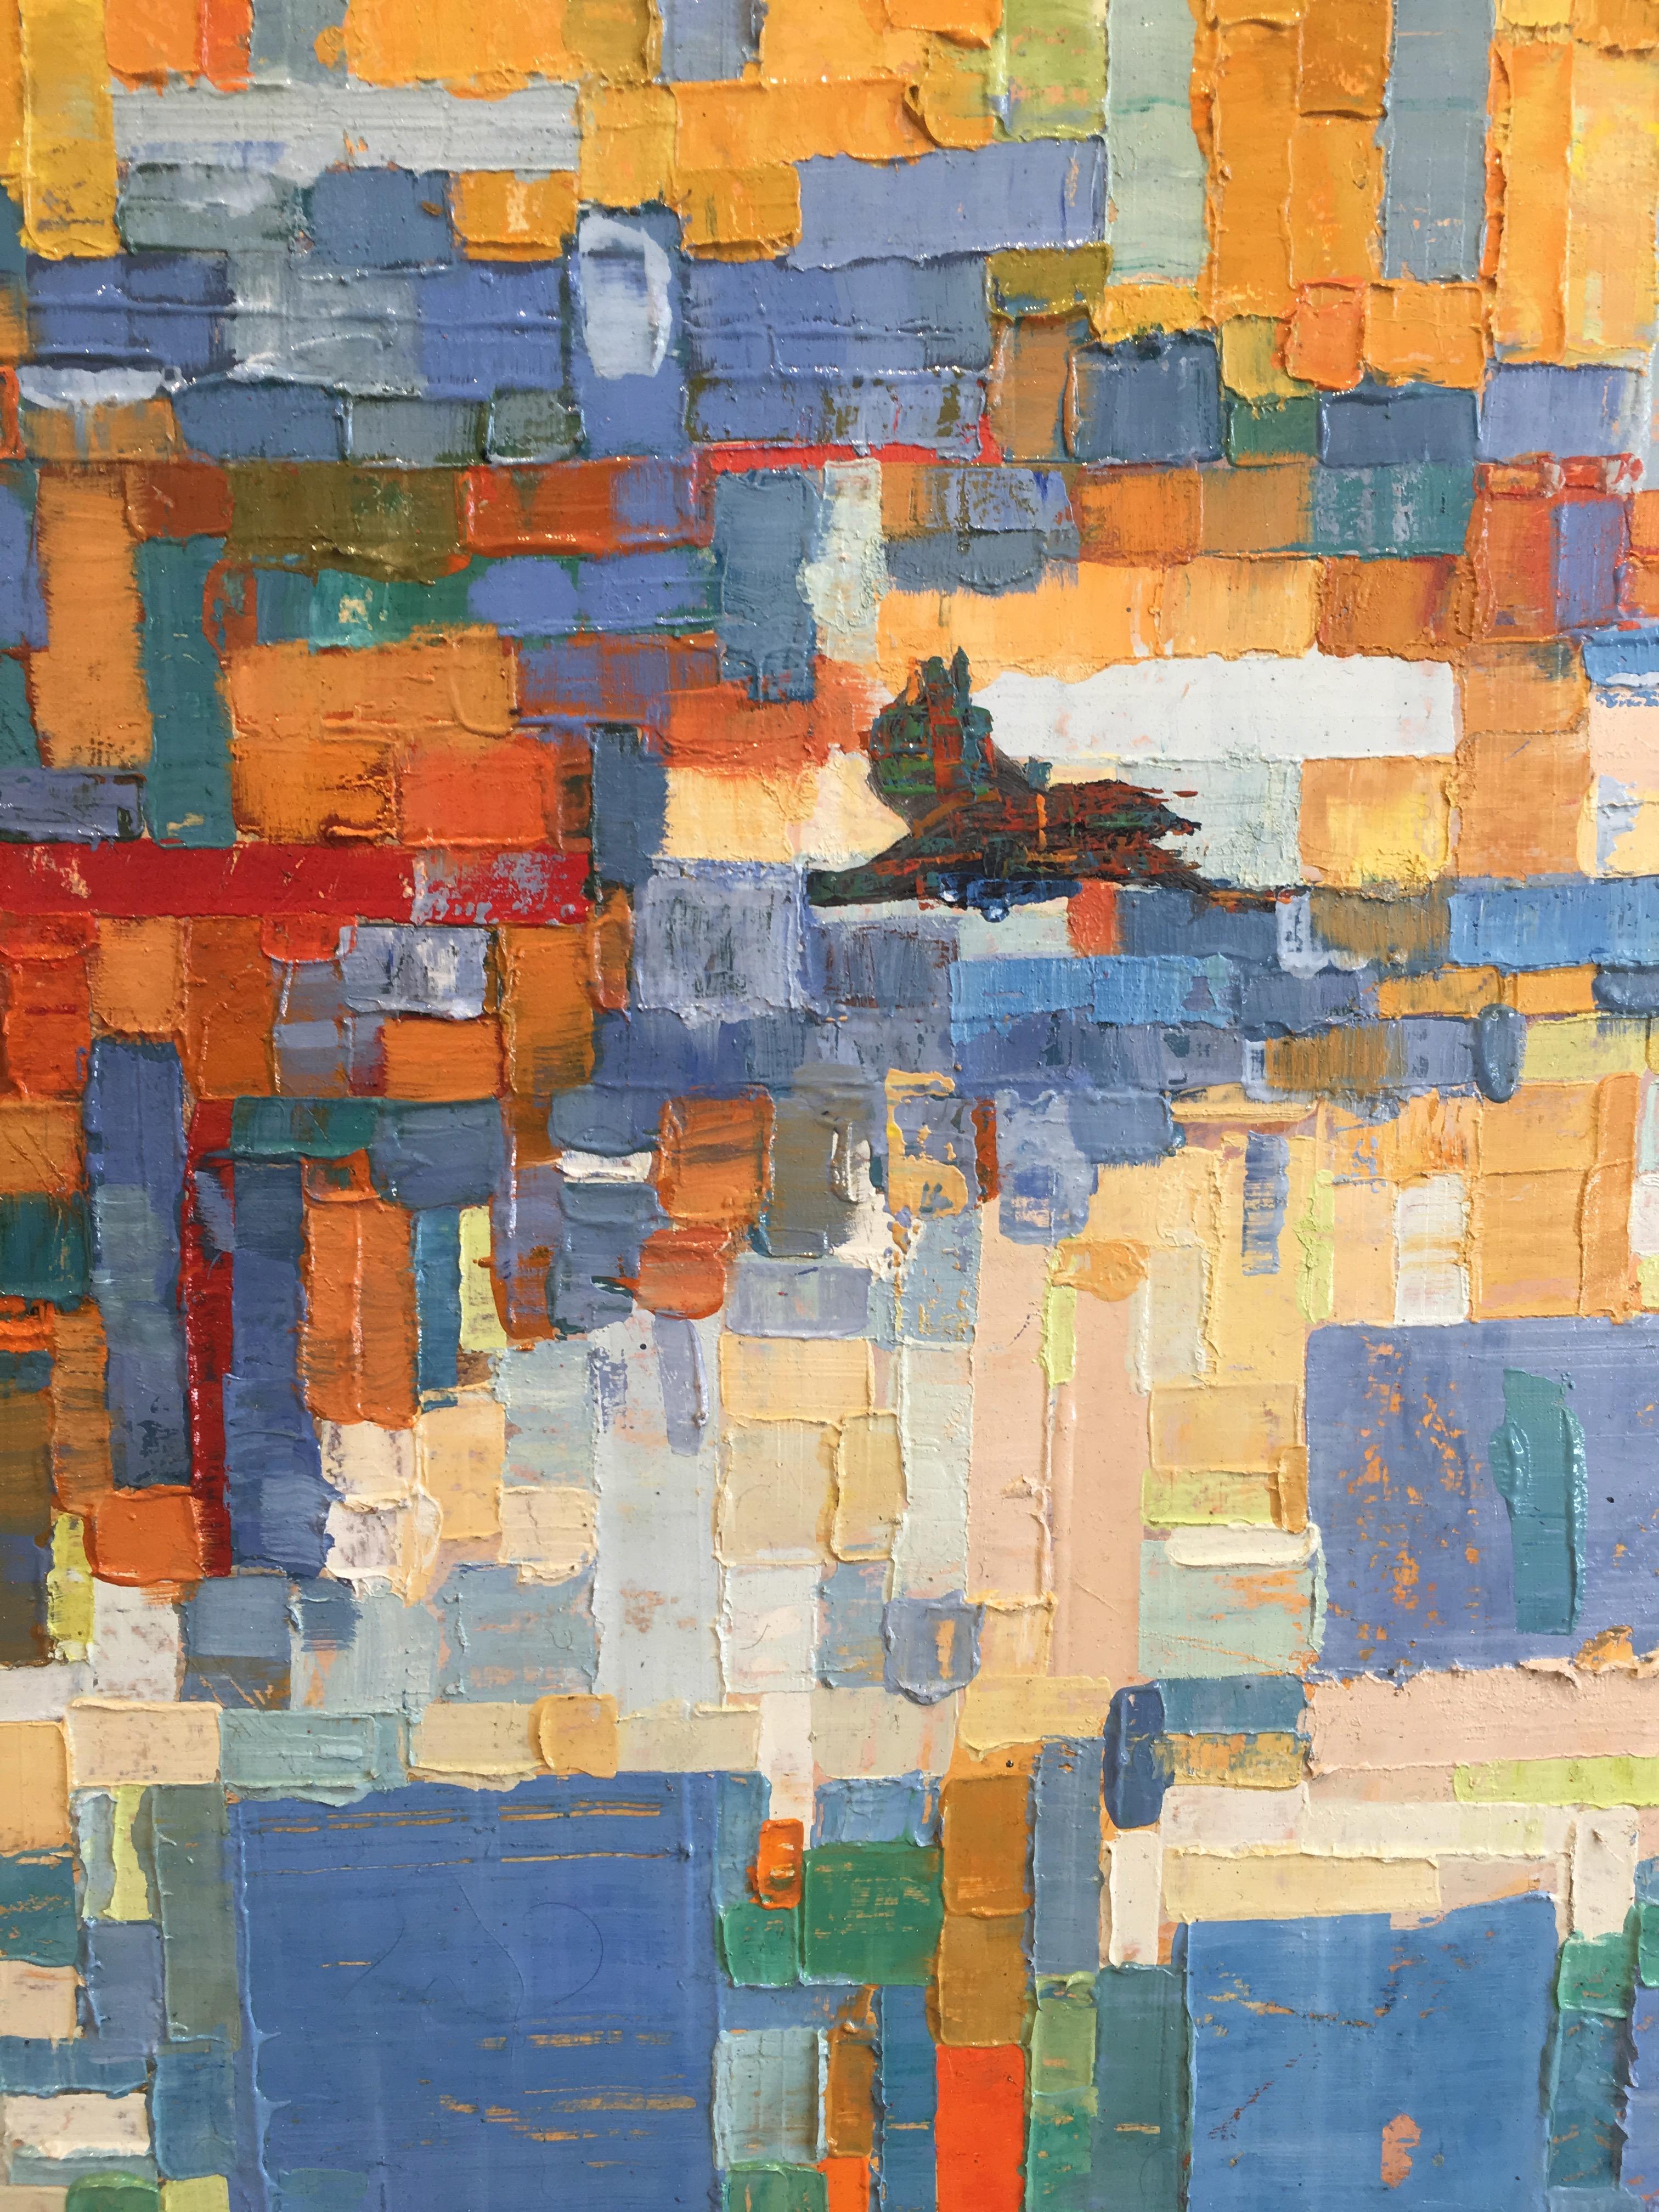 Abstract, photorealistic, grid, fractals, monochromatic, 24K gold leaf, birds, beige, blue, red, green, orange, grey, pastels, hand-ground oil paint.


ARTIST BIO:
As a Mid-town Manhattan Artist, Ned Martin paints what he sees everyday in hectic